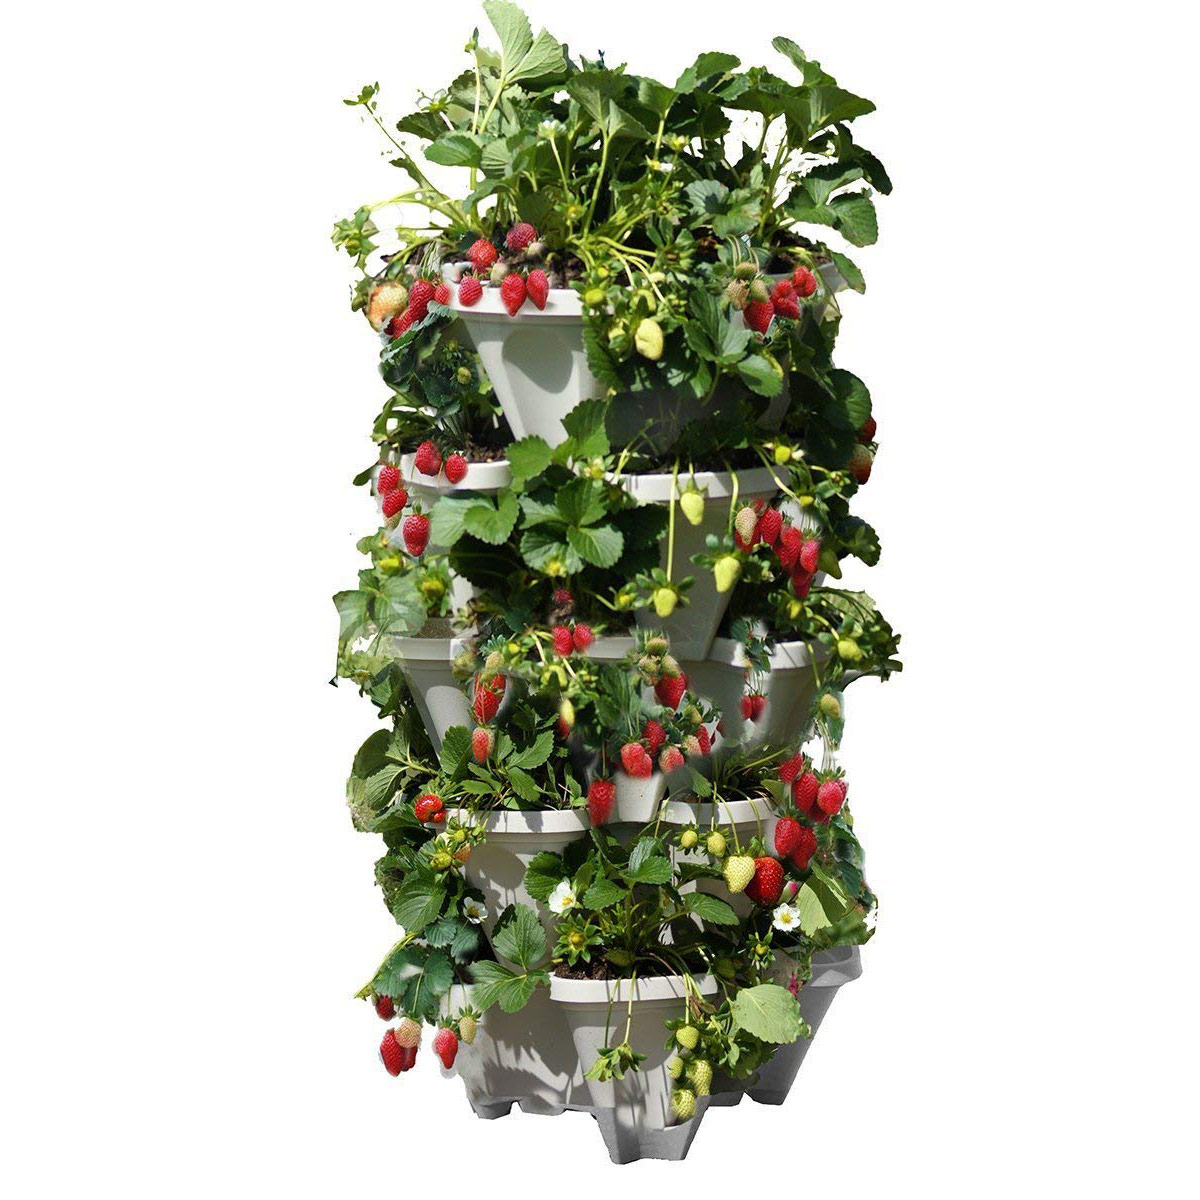 Used for Strawberries Herbs Peppers Flowers and Succulents Stacking Garden Pots Coadura Stackable Planter 5 Tier Vertical Planters for Outdoor Plants